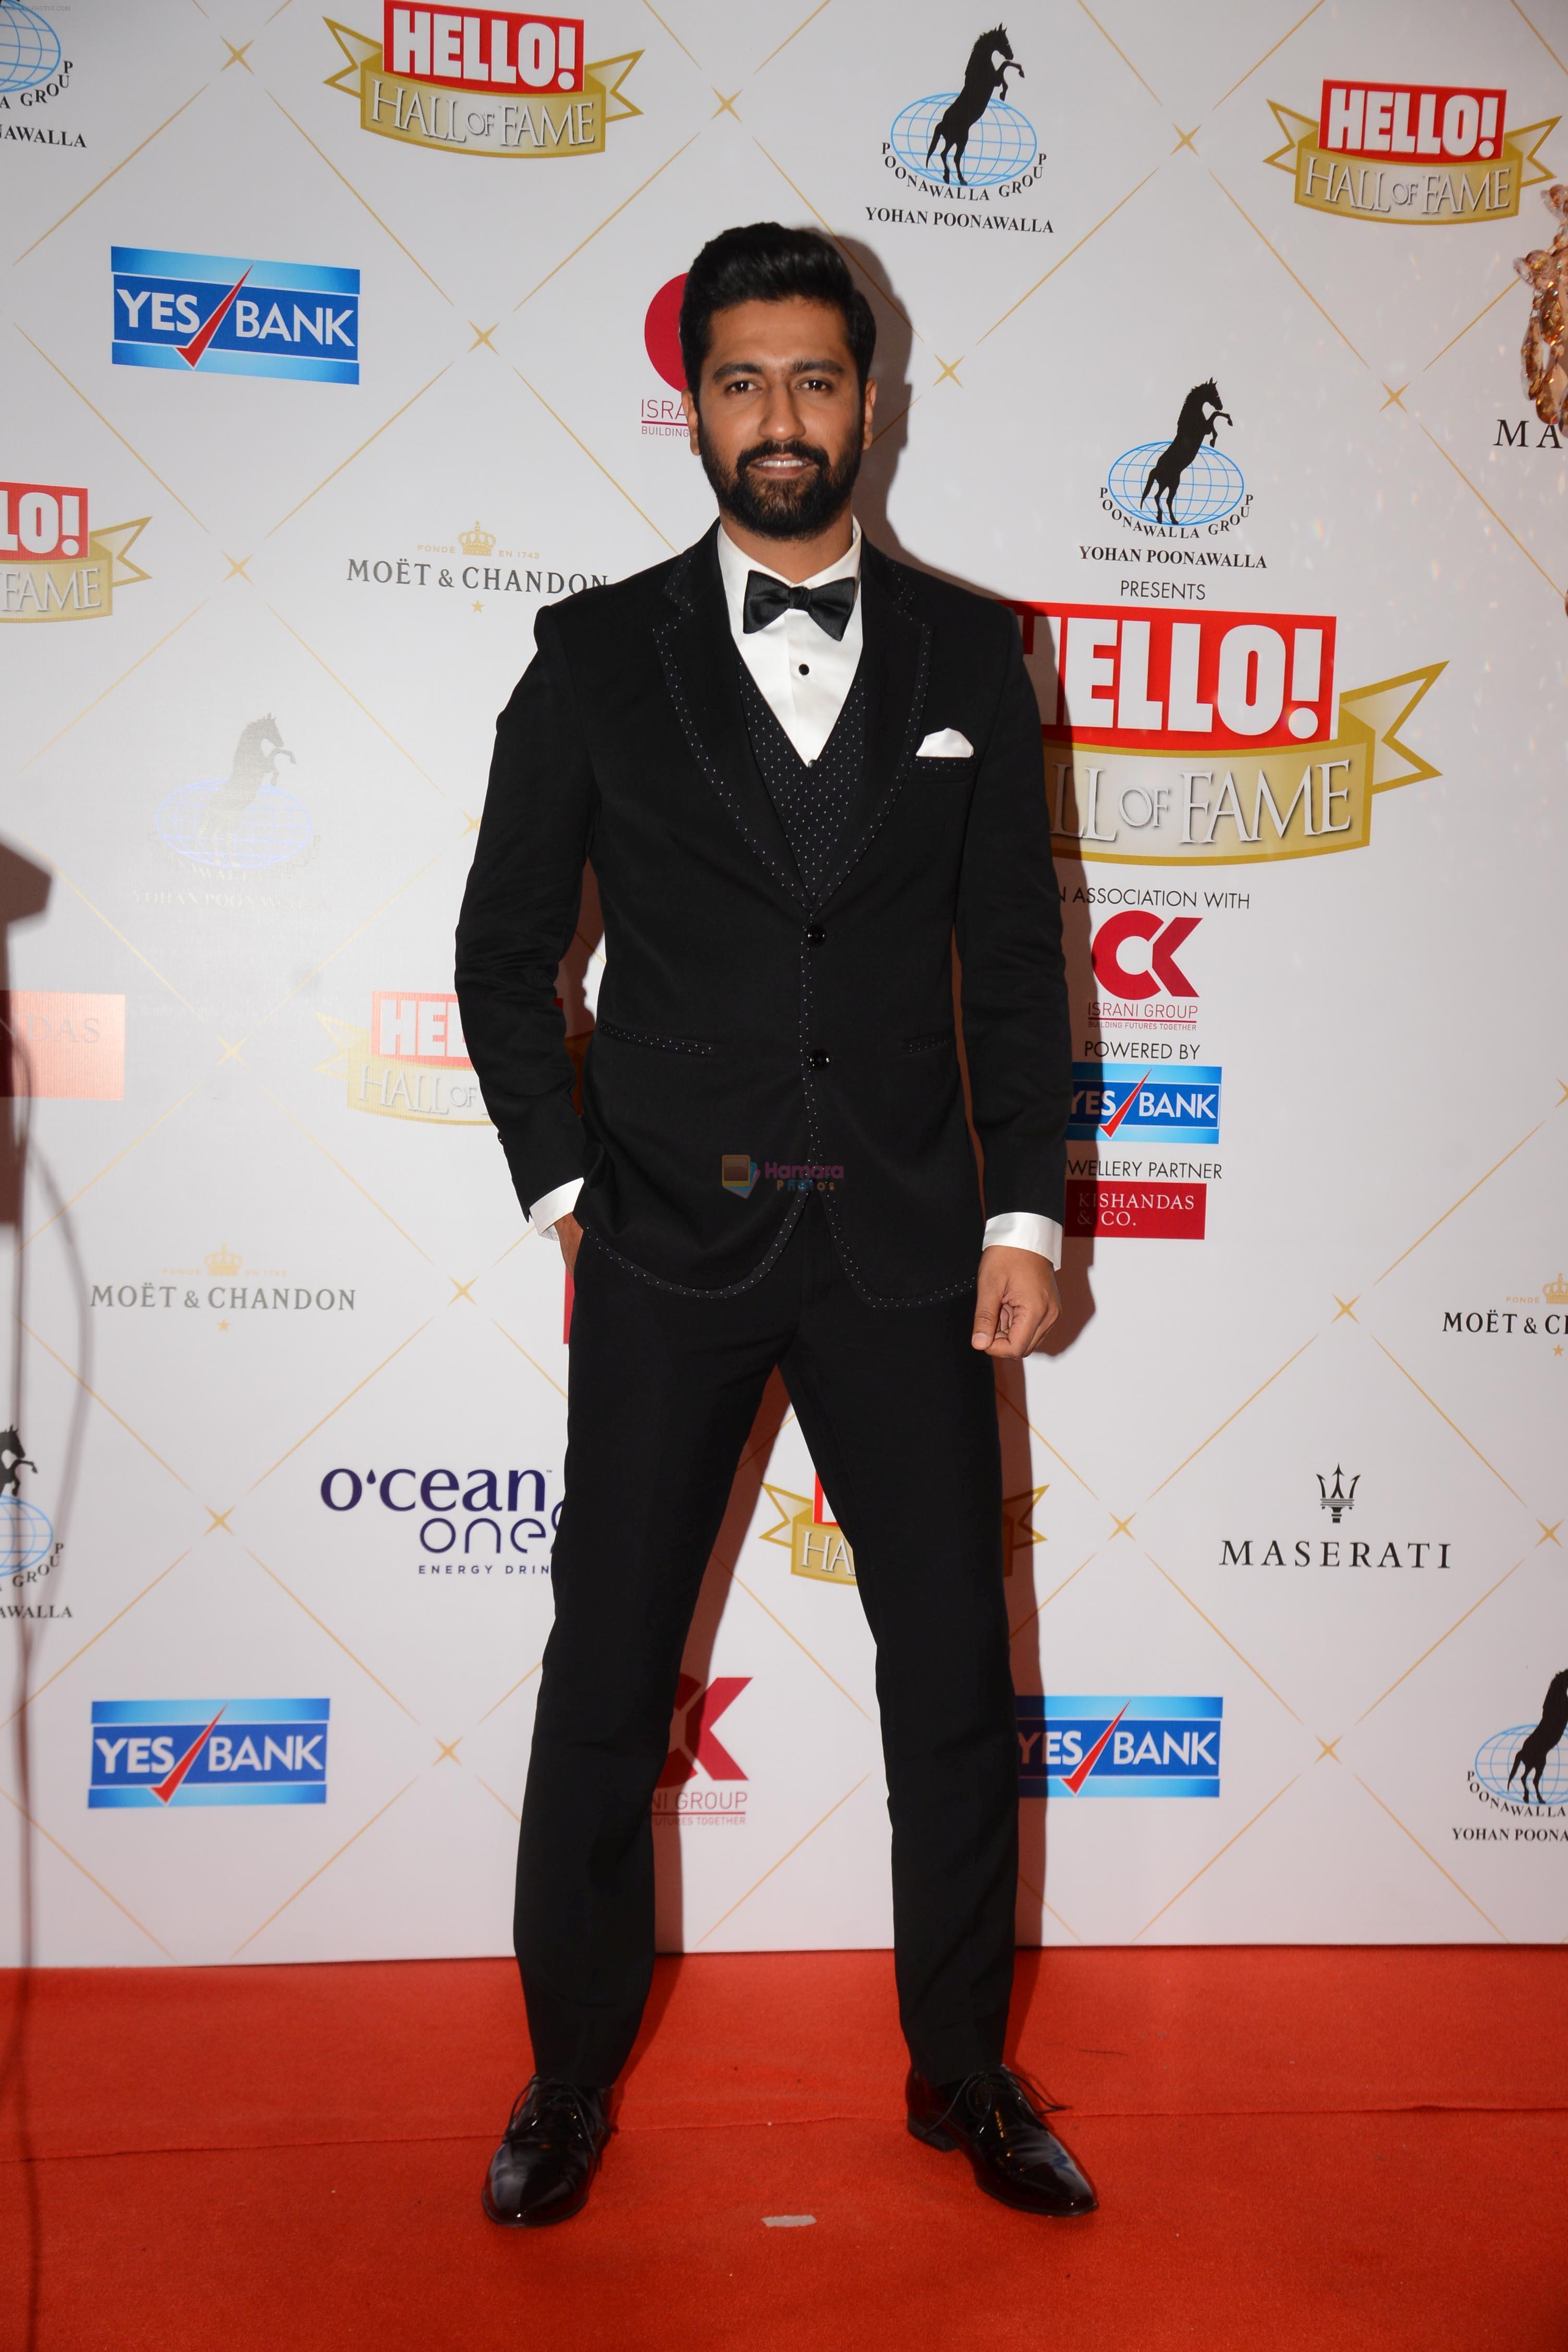 Vicky Kaushal at the Hello Hall of Fame Awards in St Regis hotel on 18th March 2019